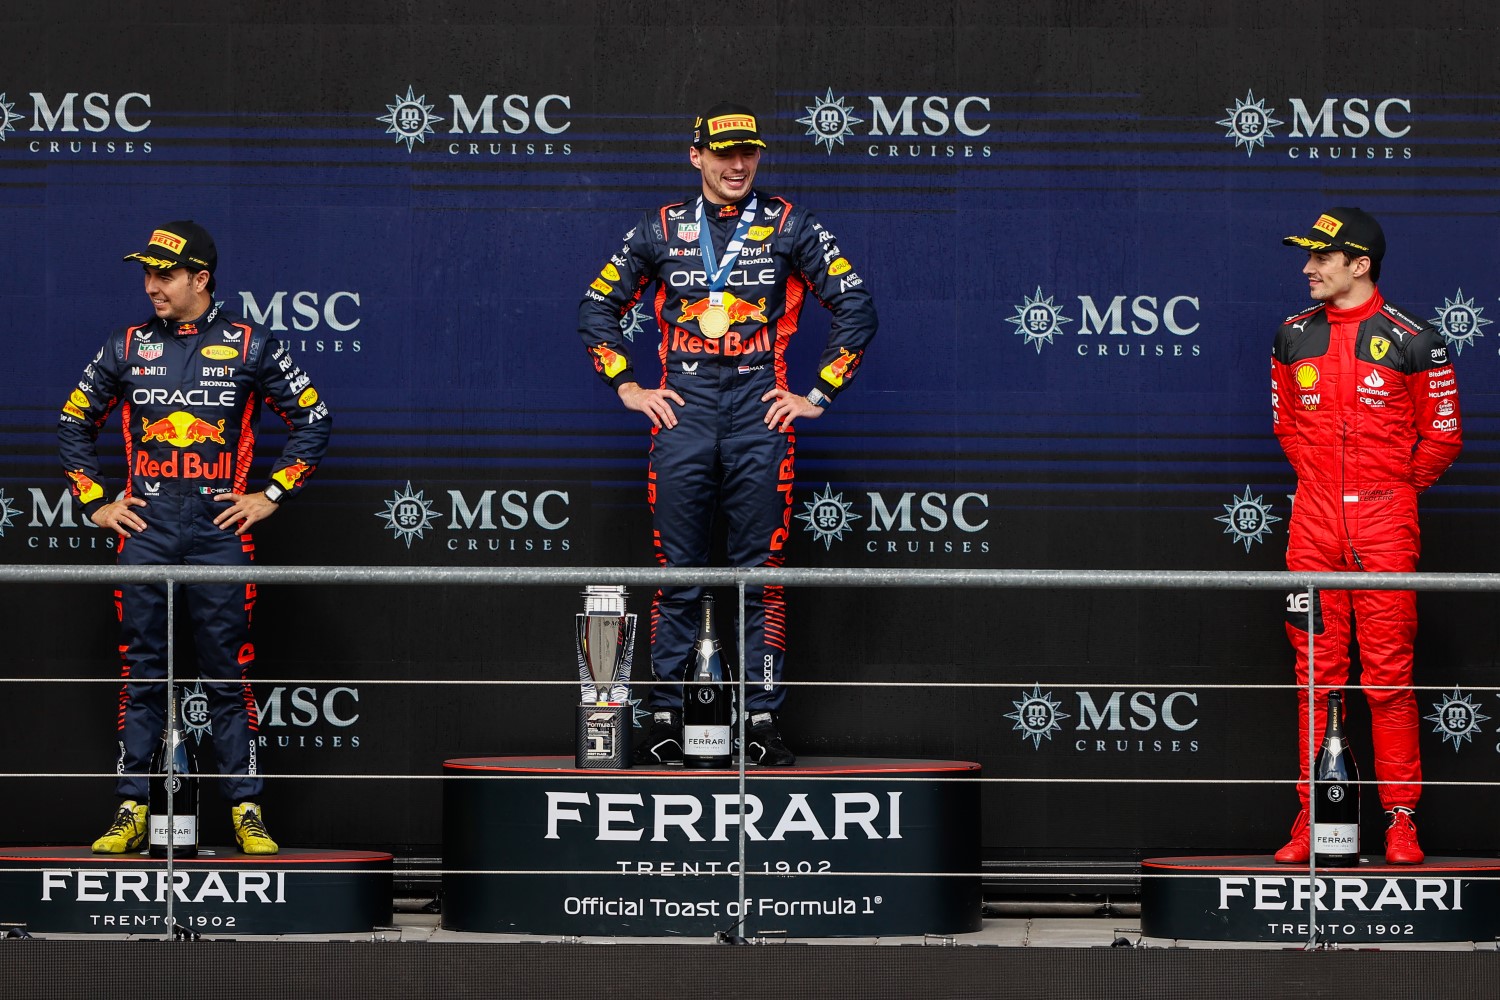 Sergio Perez, Red Bull Racing, 2nd position, Max Verstappen, Red Bull Racing, 1st position, and Charles Leclerc, Scuderia Ferrari, 3rd position, on the podium during the Belgian GP at Circuit de Spa Francorchamps on Sunday July 30, 2023 in Spa, Belgium. (Photo by Andy Hone / LAT Images)